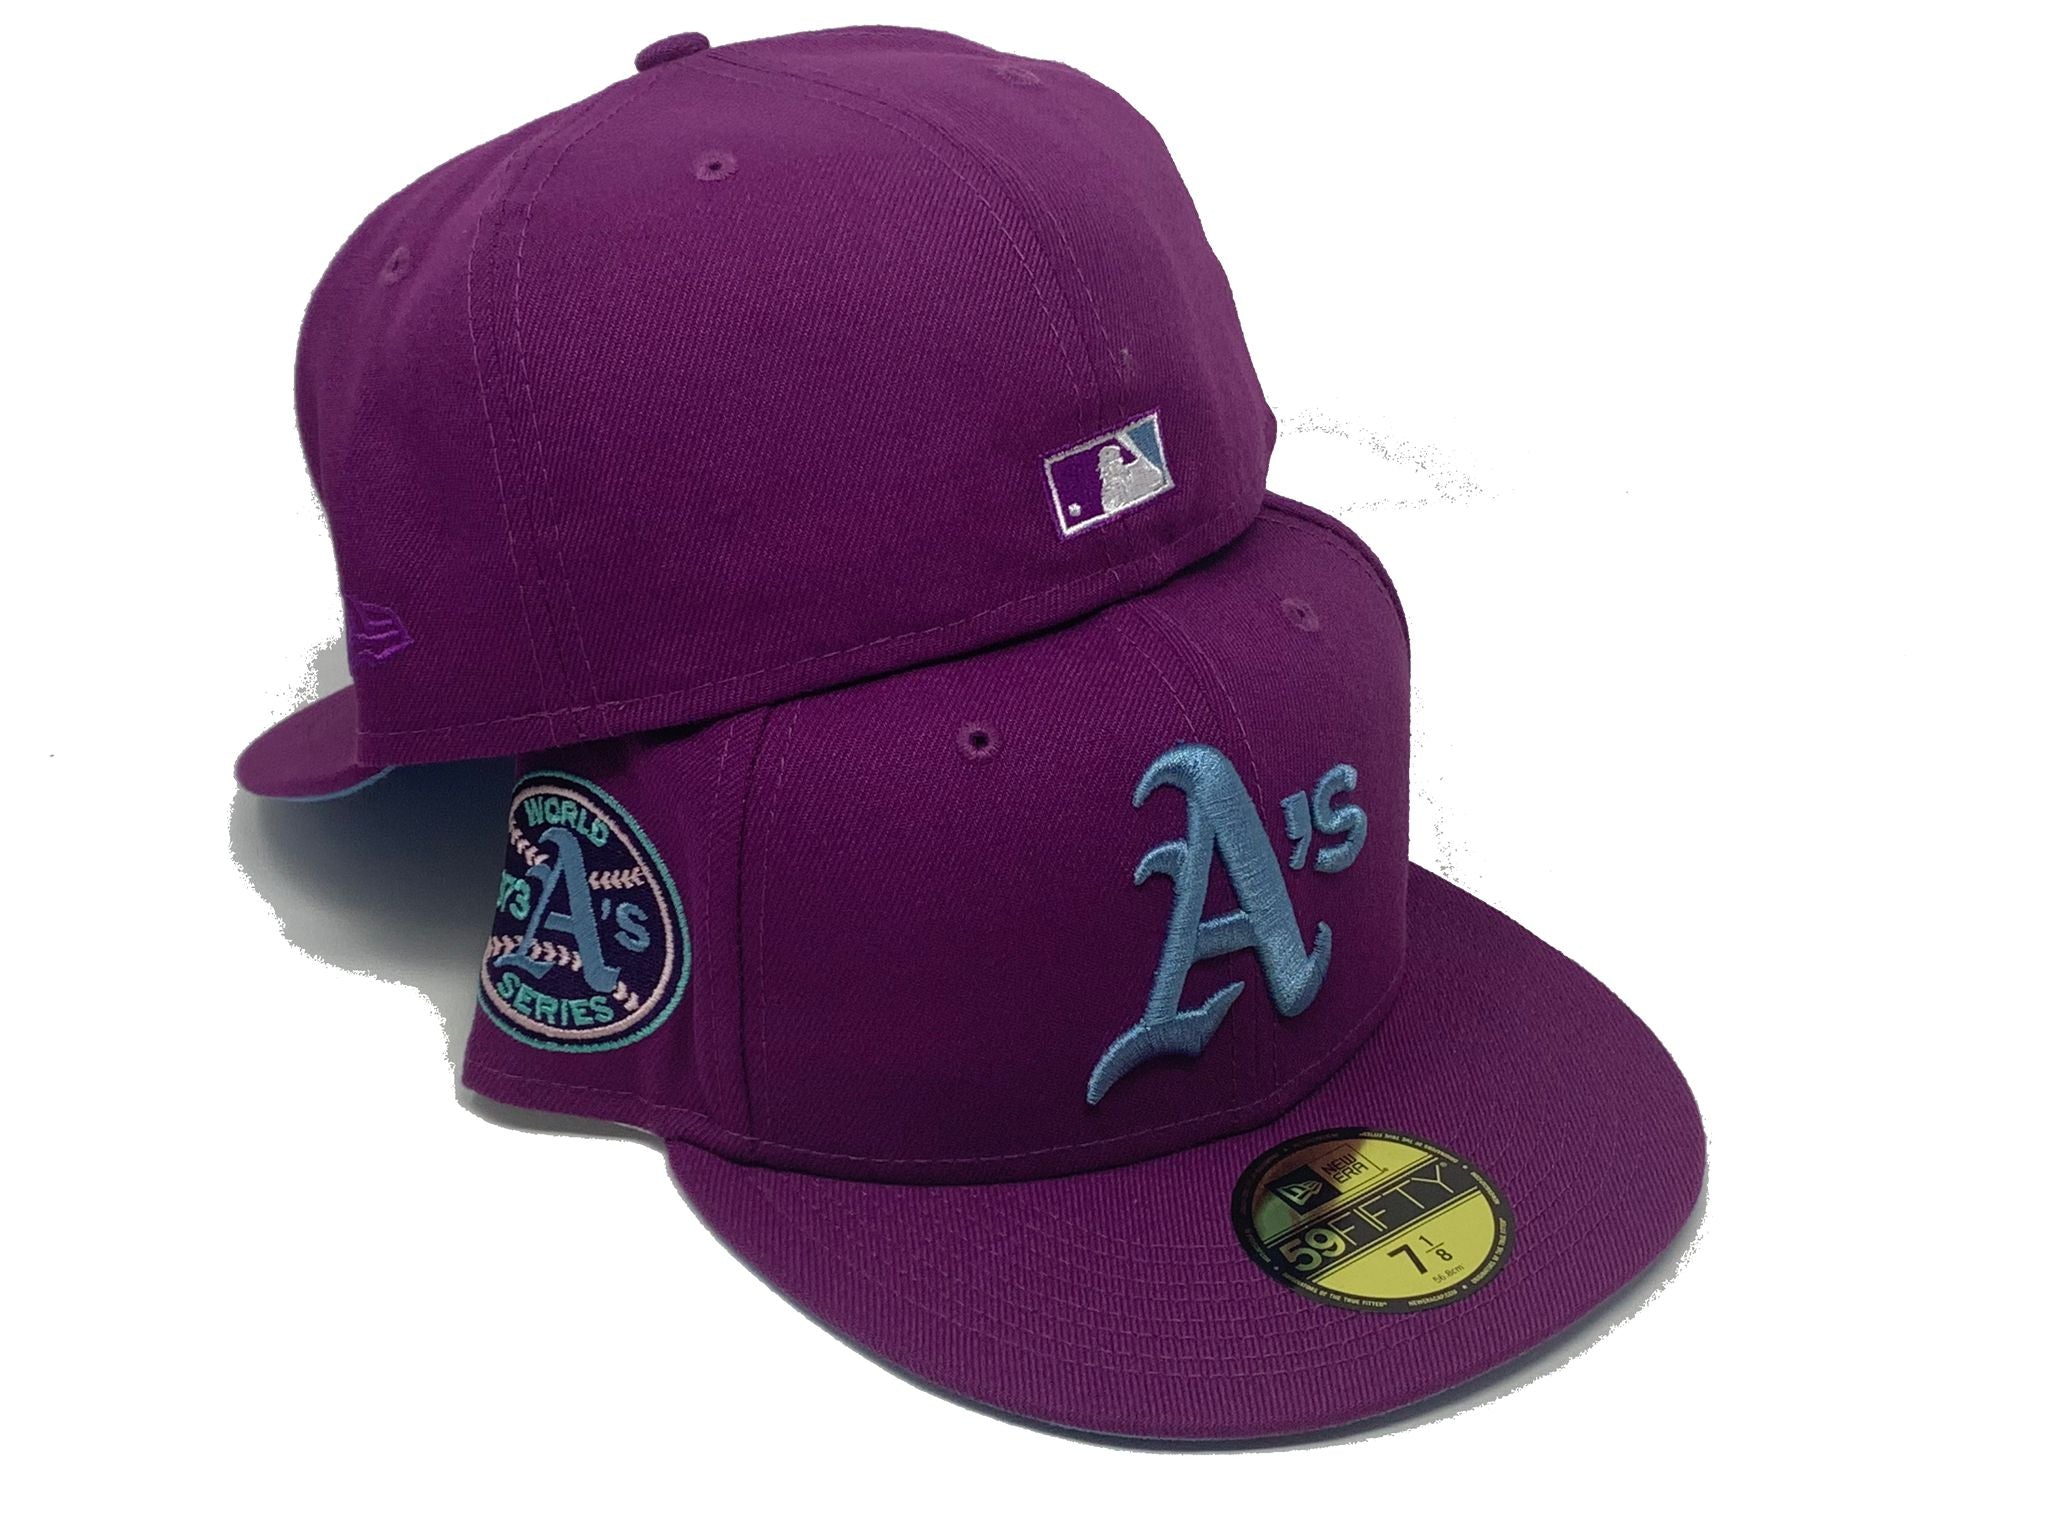 New Era Oakland Athletics Jersey Prime Edition 59Fifty Fitted Hat, DROPS